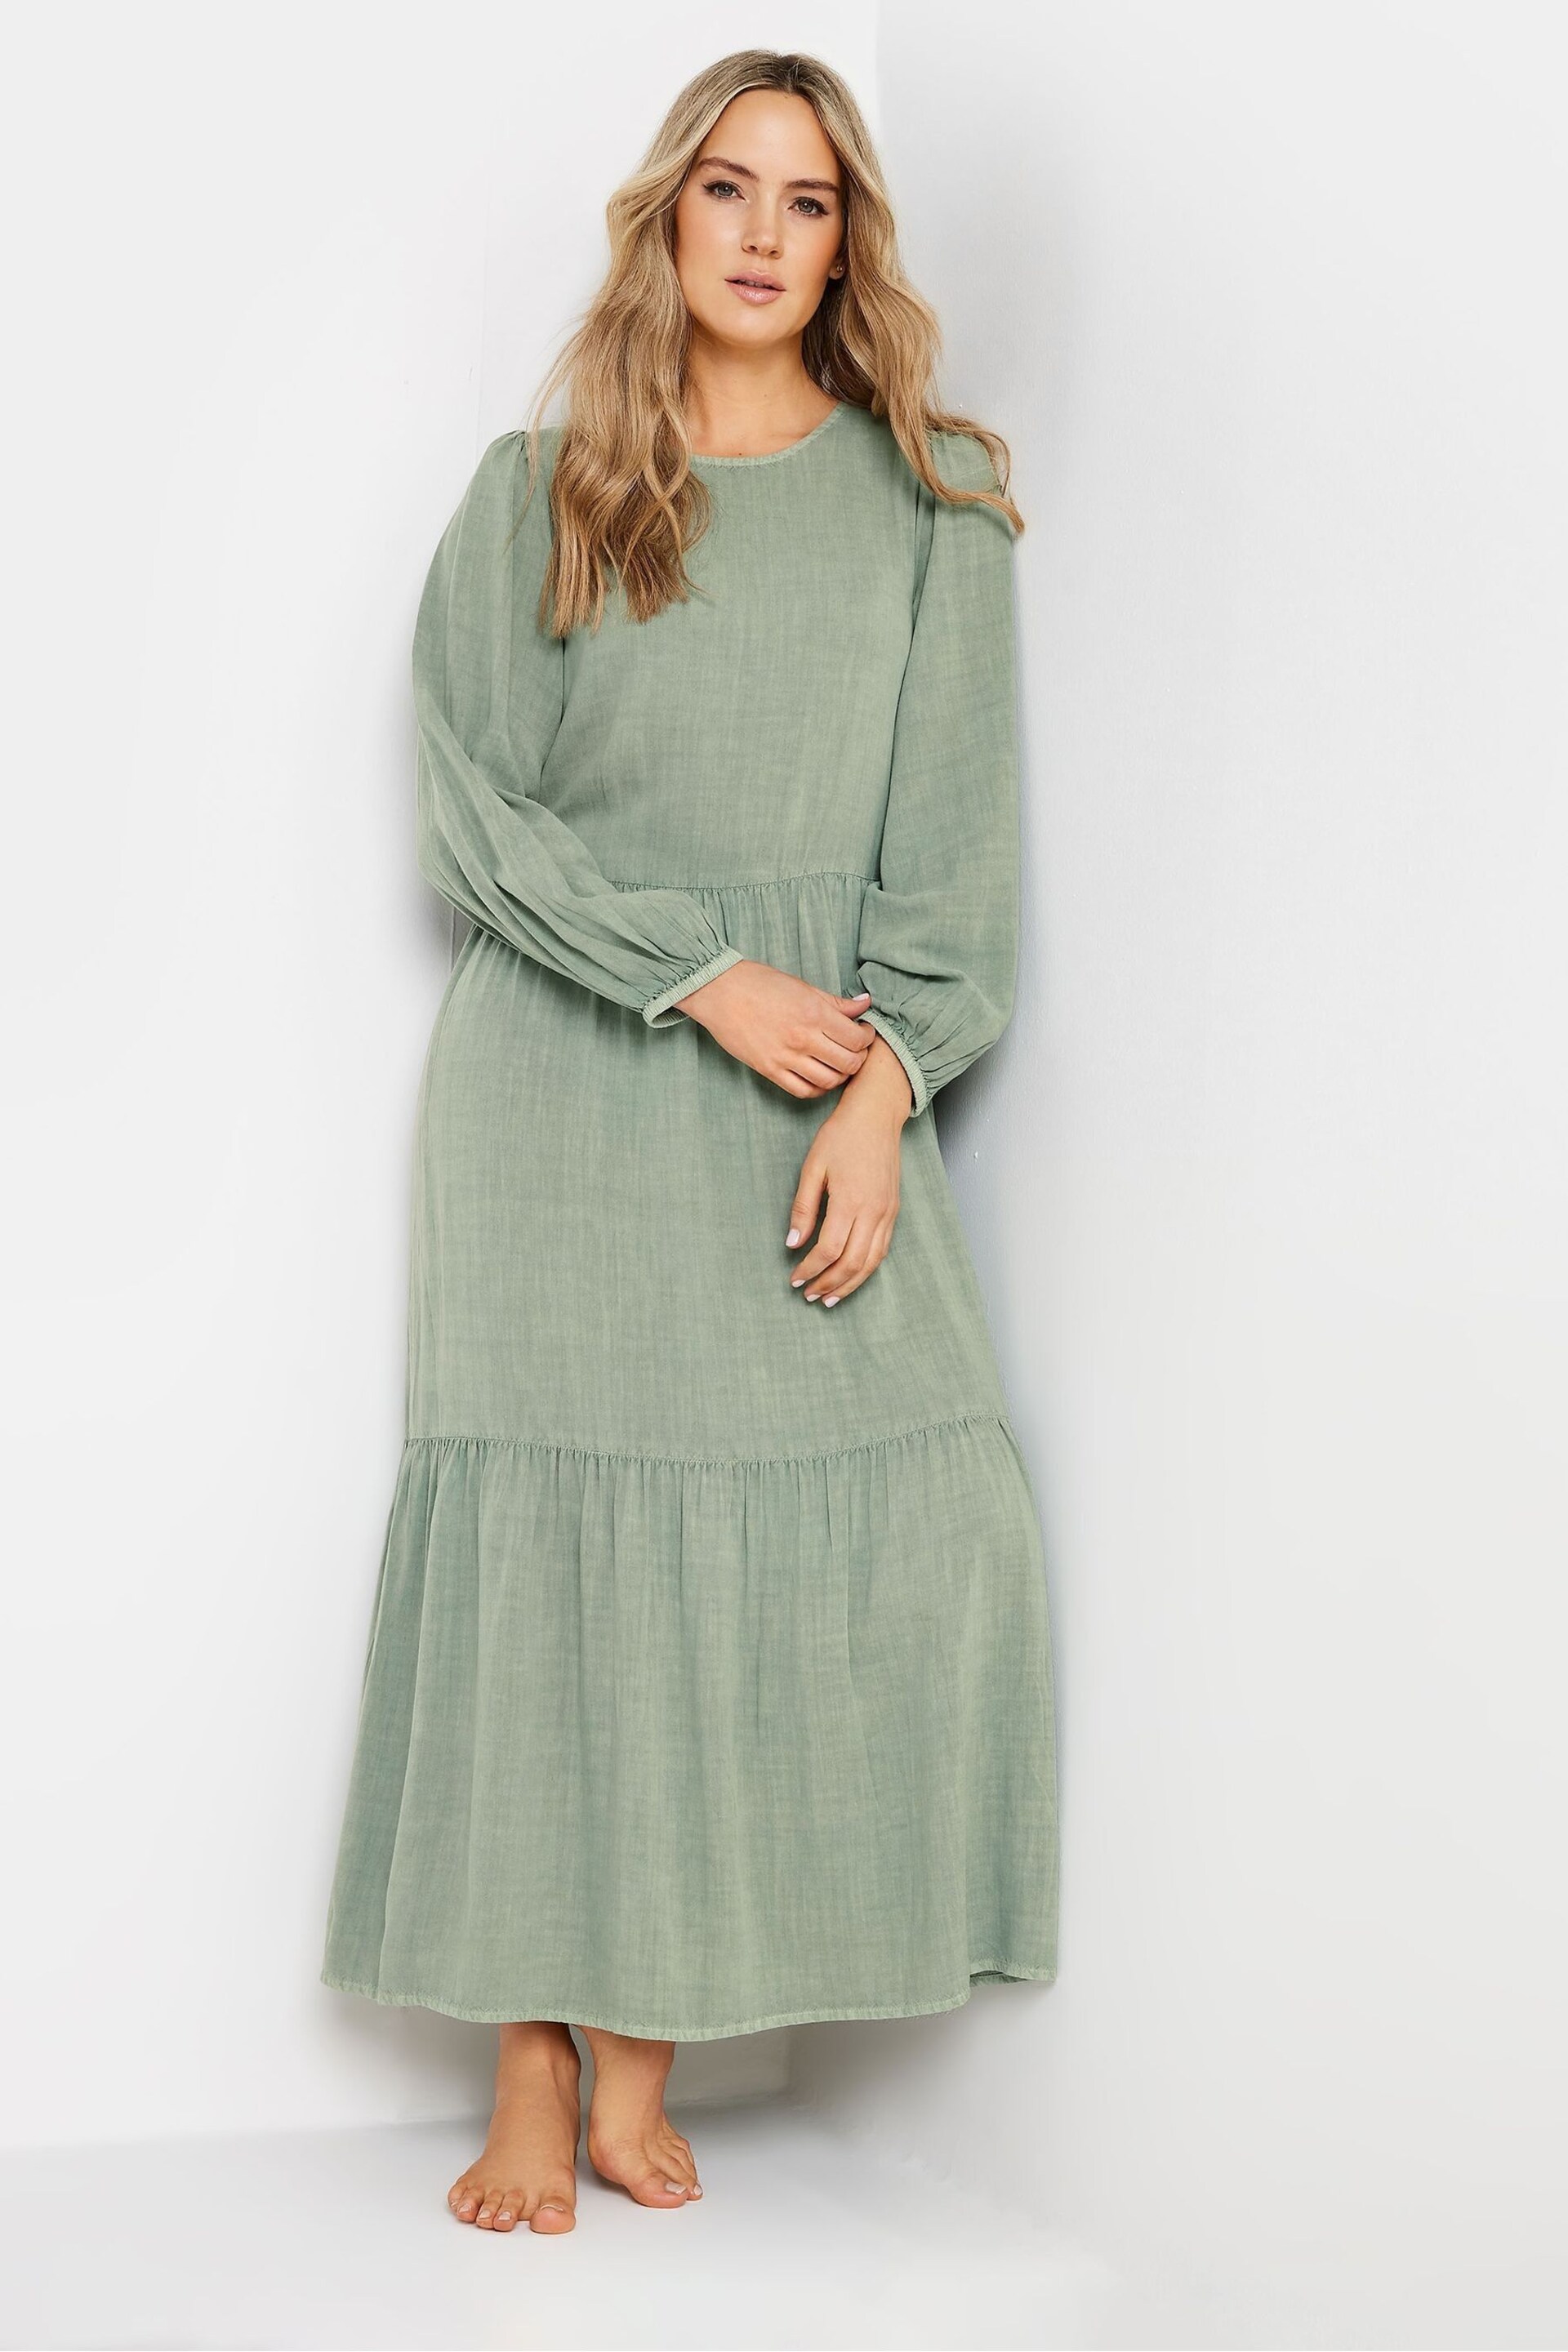 Long Tall Sally Green Smock Tiered Dress - Image 1 of 4